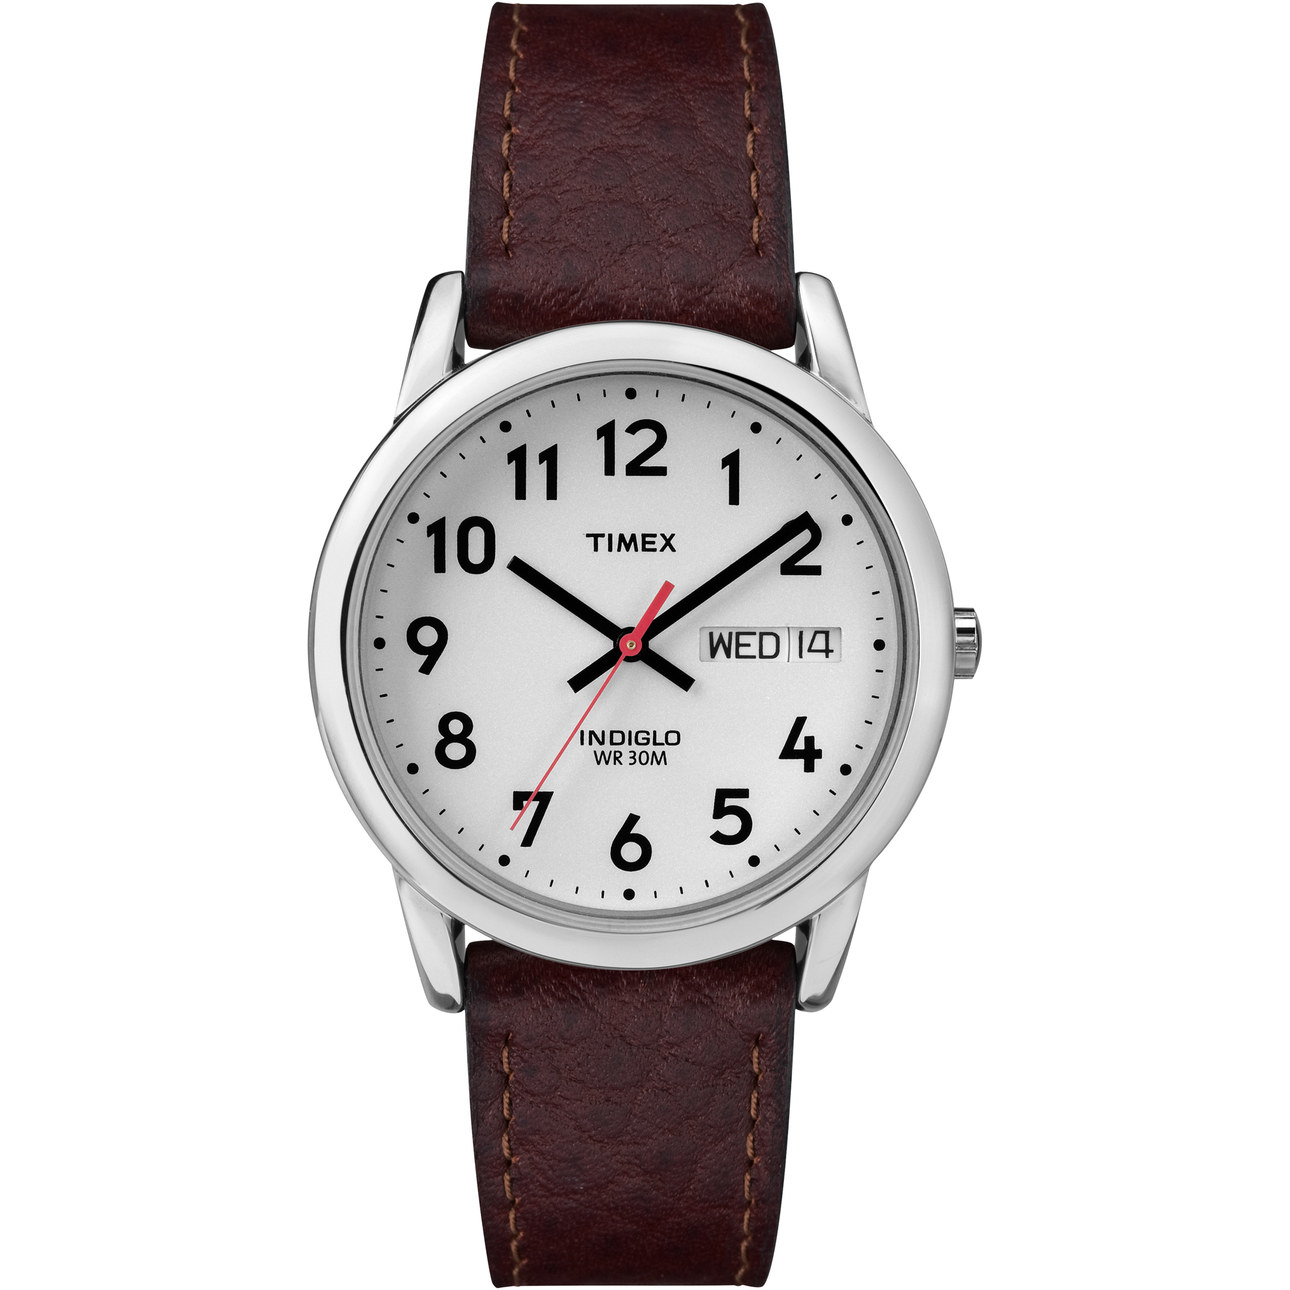 white watch with large black numbers, a brown leather band, and silver detailing